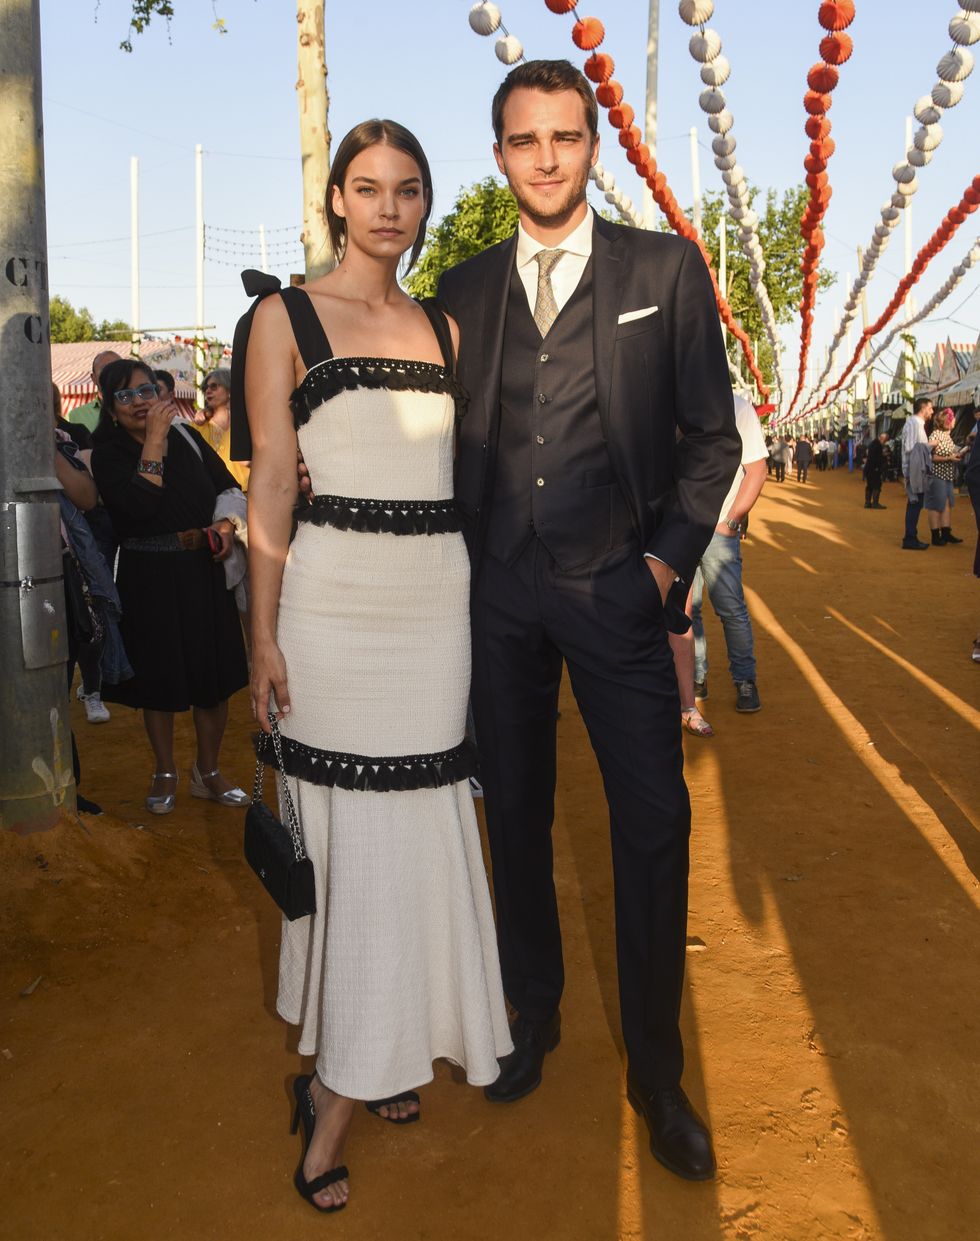 pepe barroso jr and gara arias during ines domeneq's fashion show in seville april 13 2024